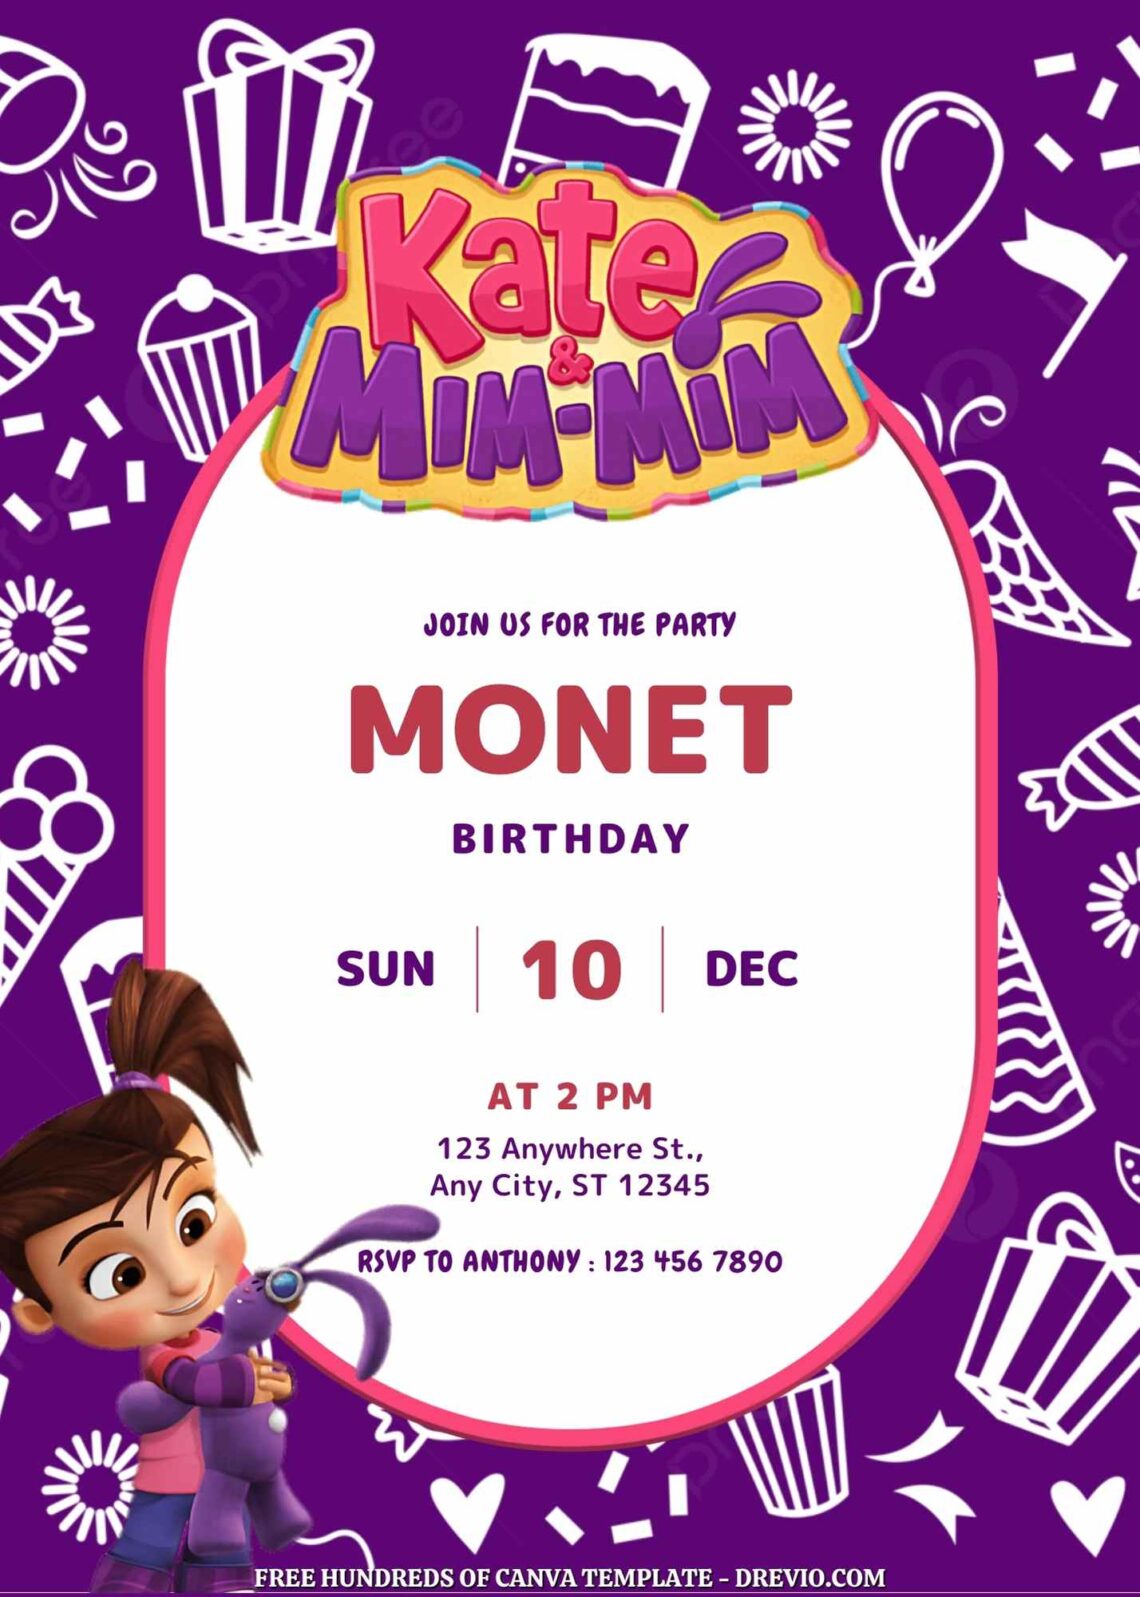 Free Kate and Mim-Mim Birthday Invitations with Purple Pattern in the Background